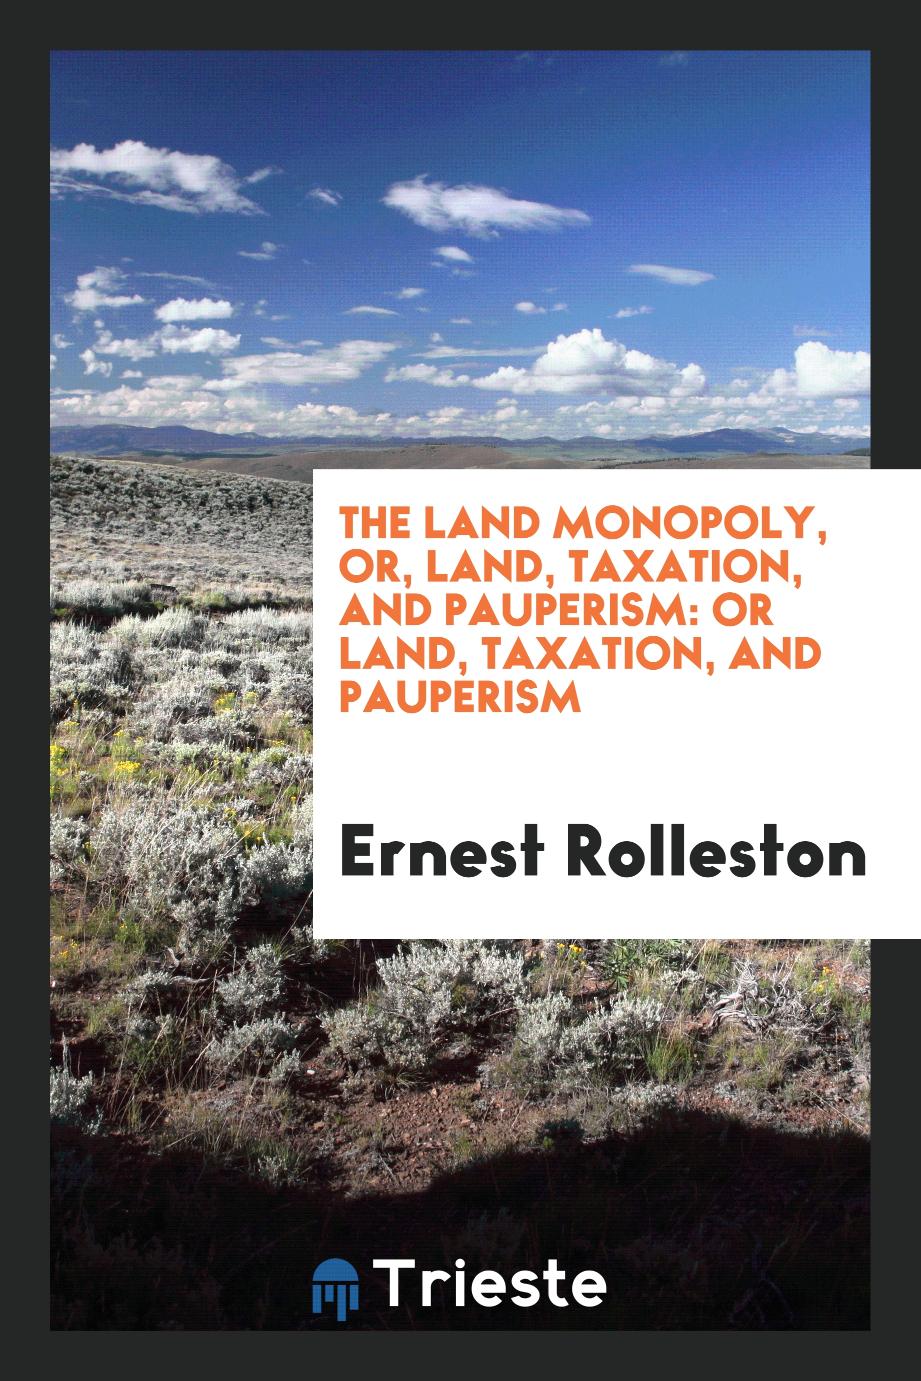 The Land Monopoly, Or, Land, Taxation, and Pauperism: Or Land, Taxation, and Pauperism